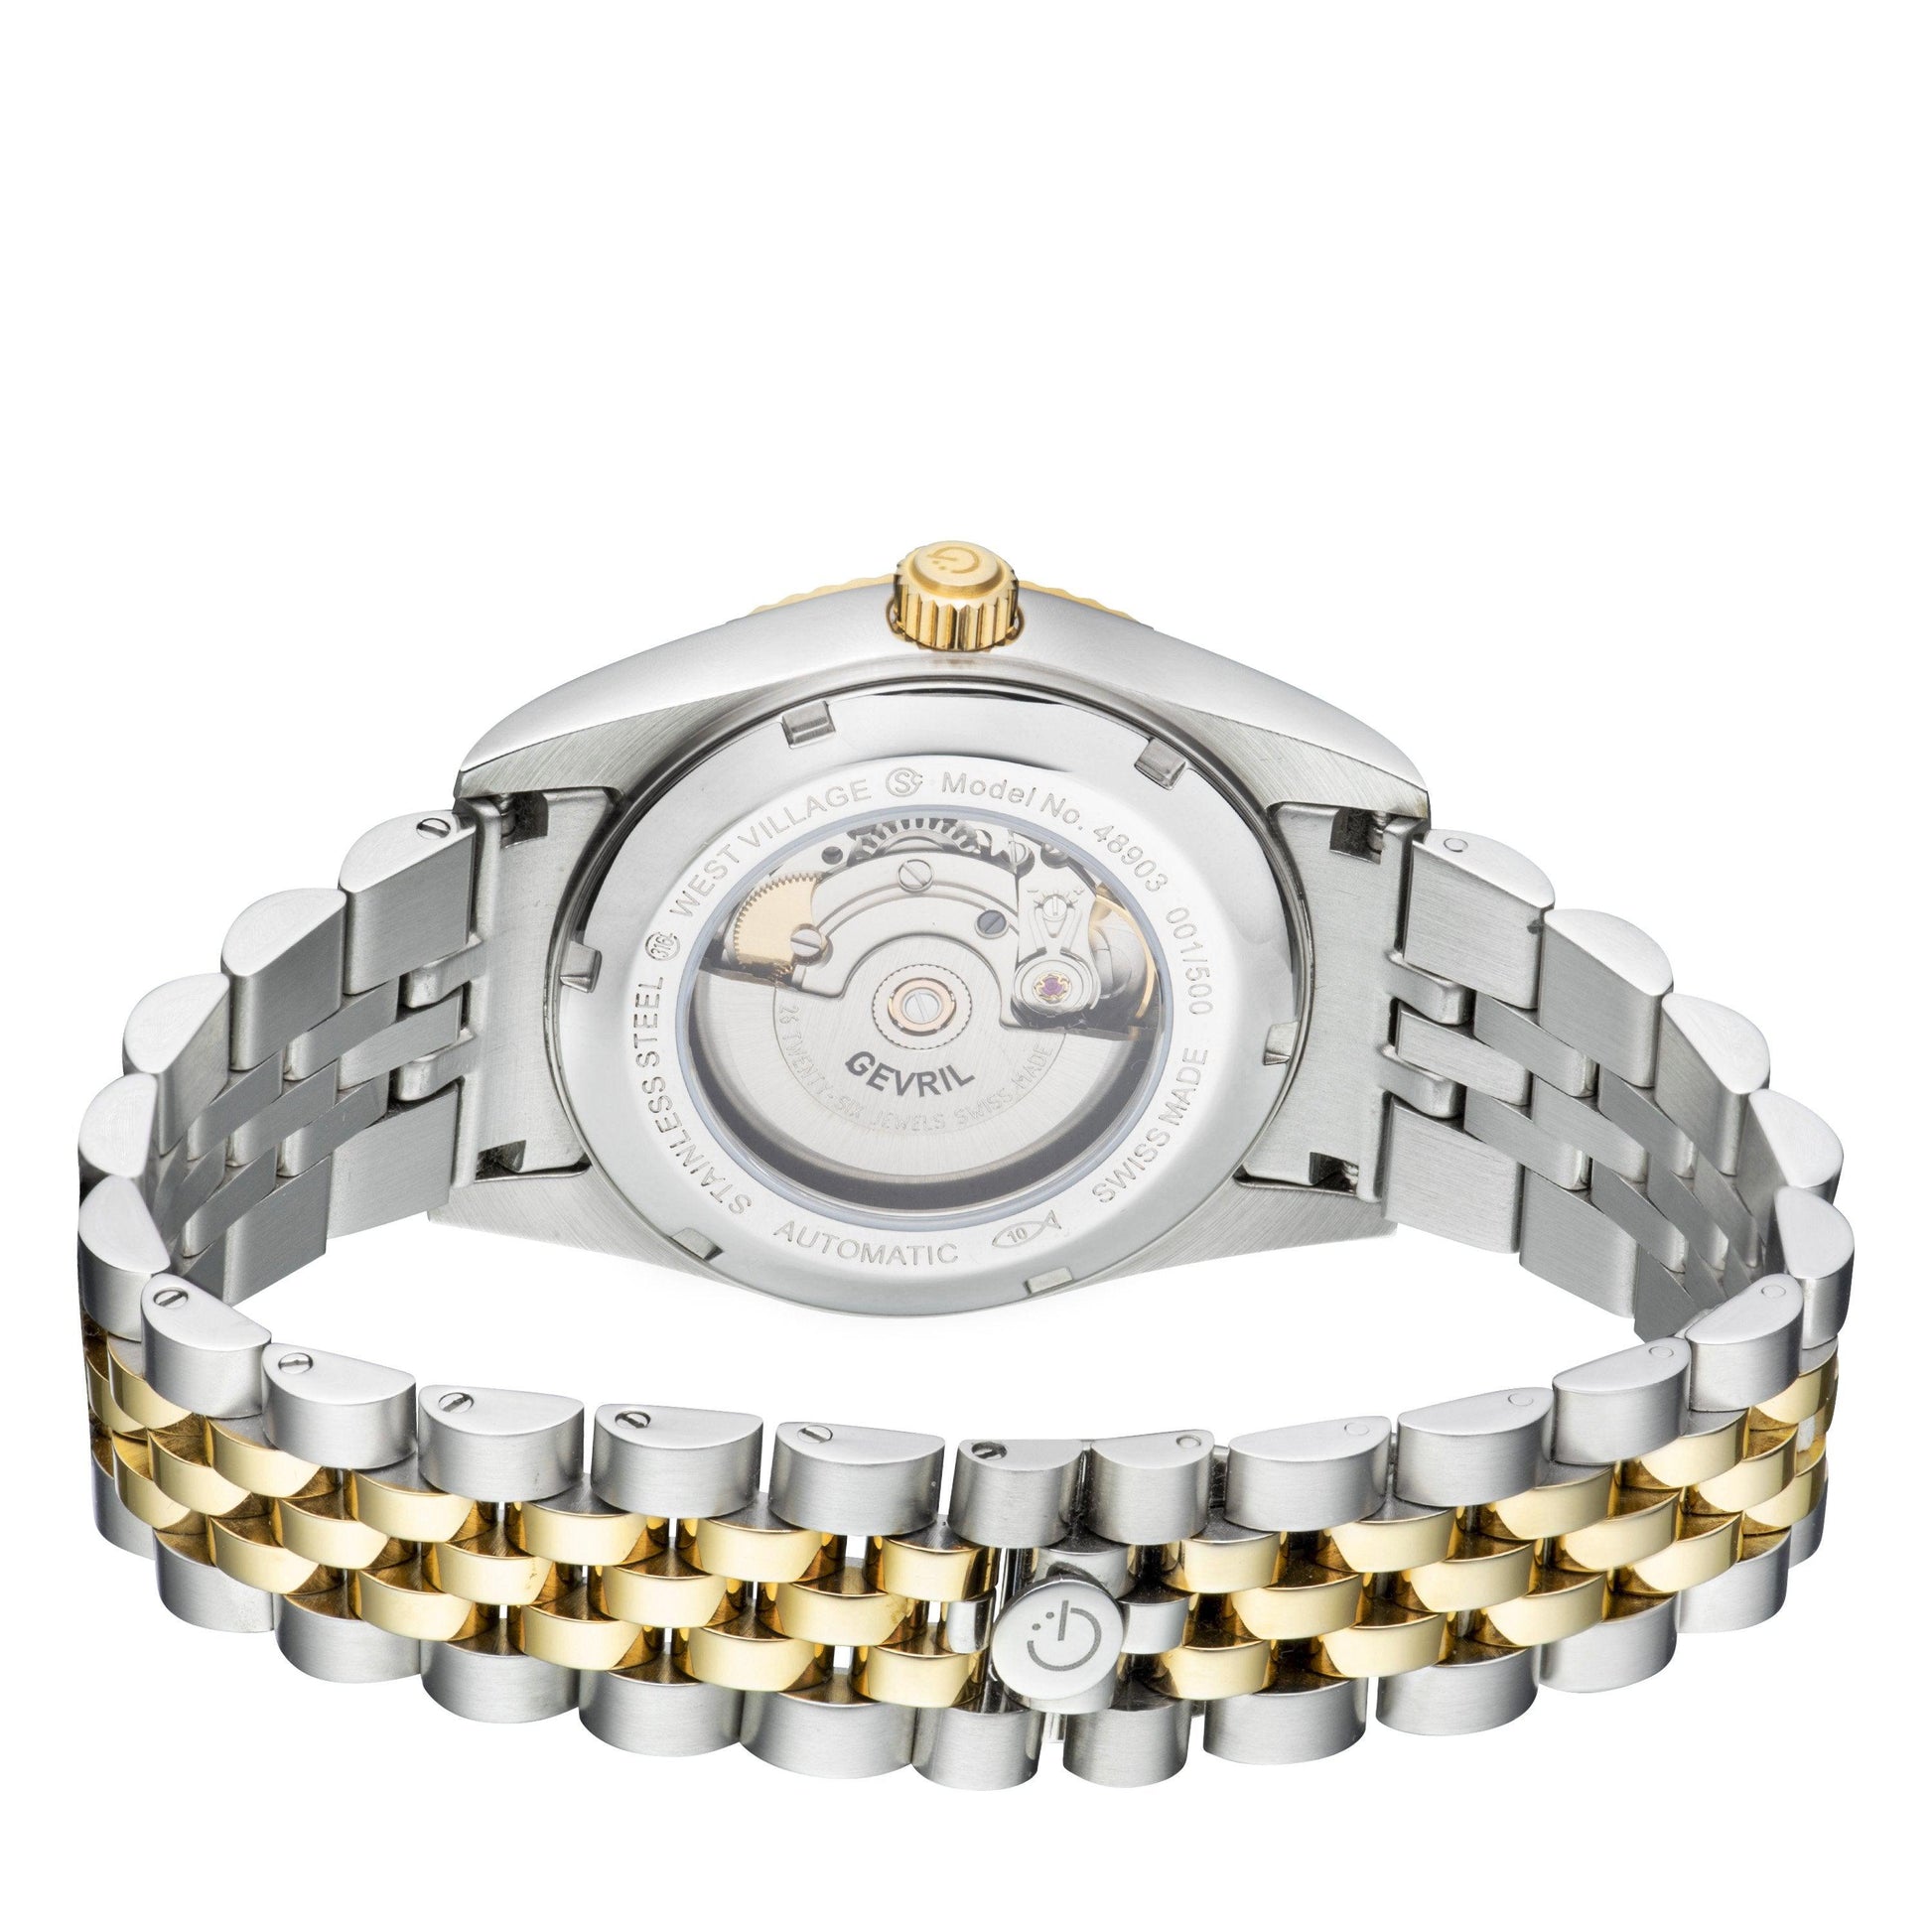 Gevril-Luxury-Swiss-Watches-Gevril West Village - Automatic-48903